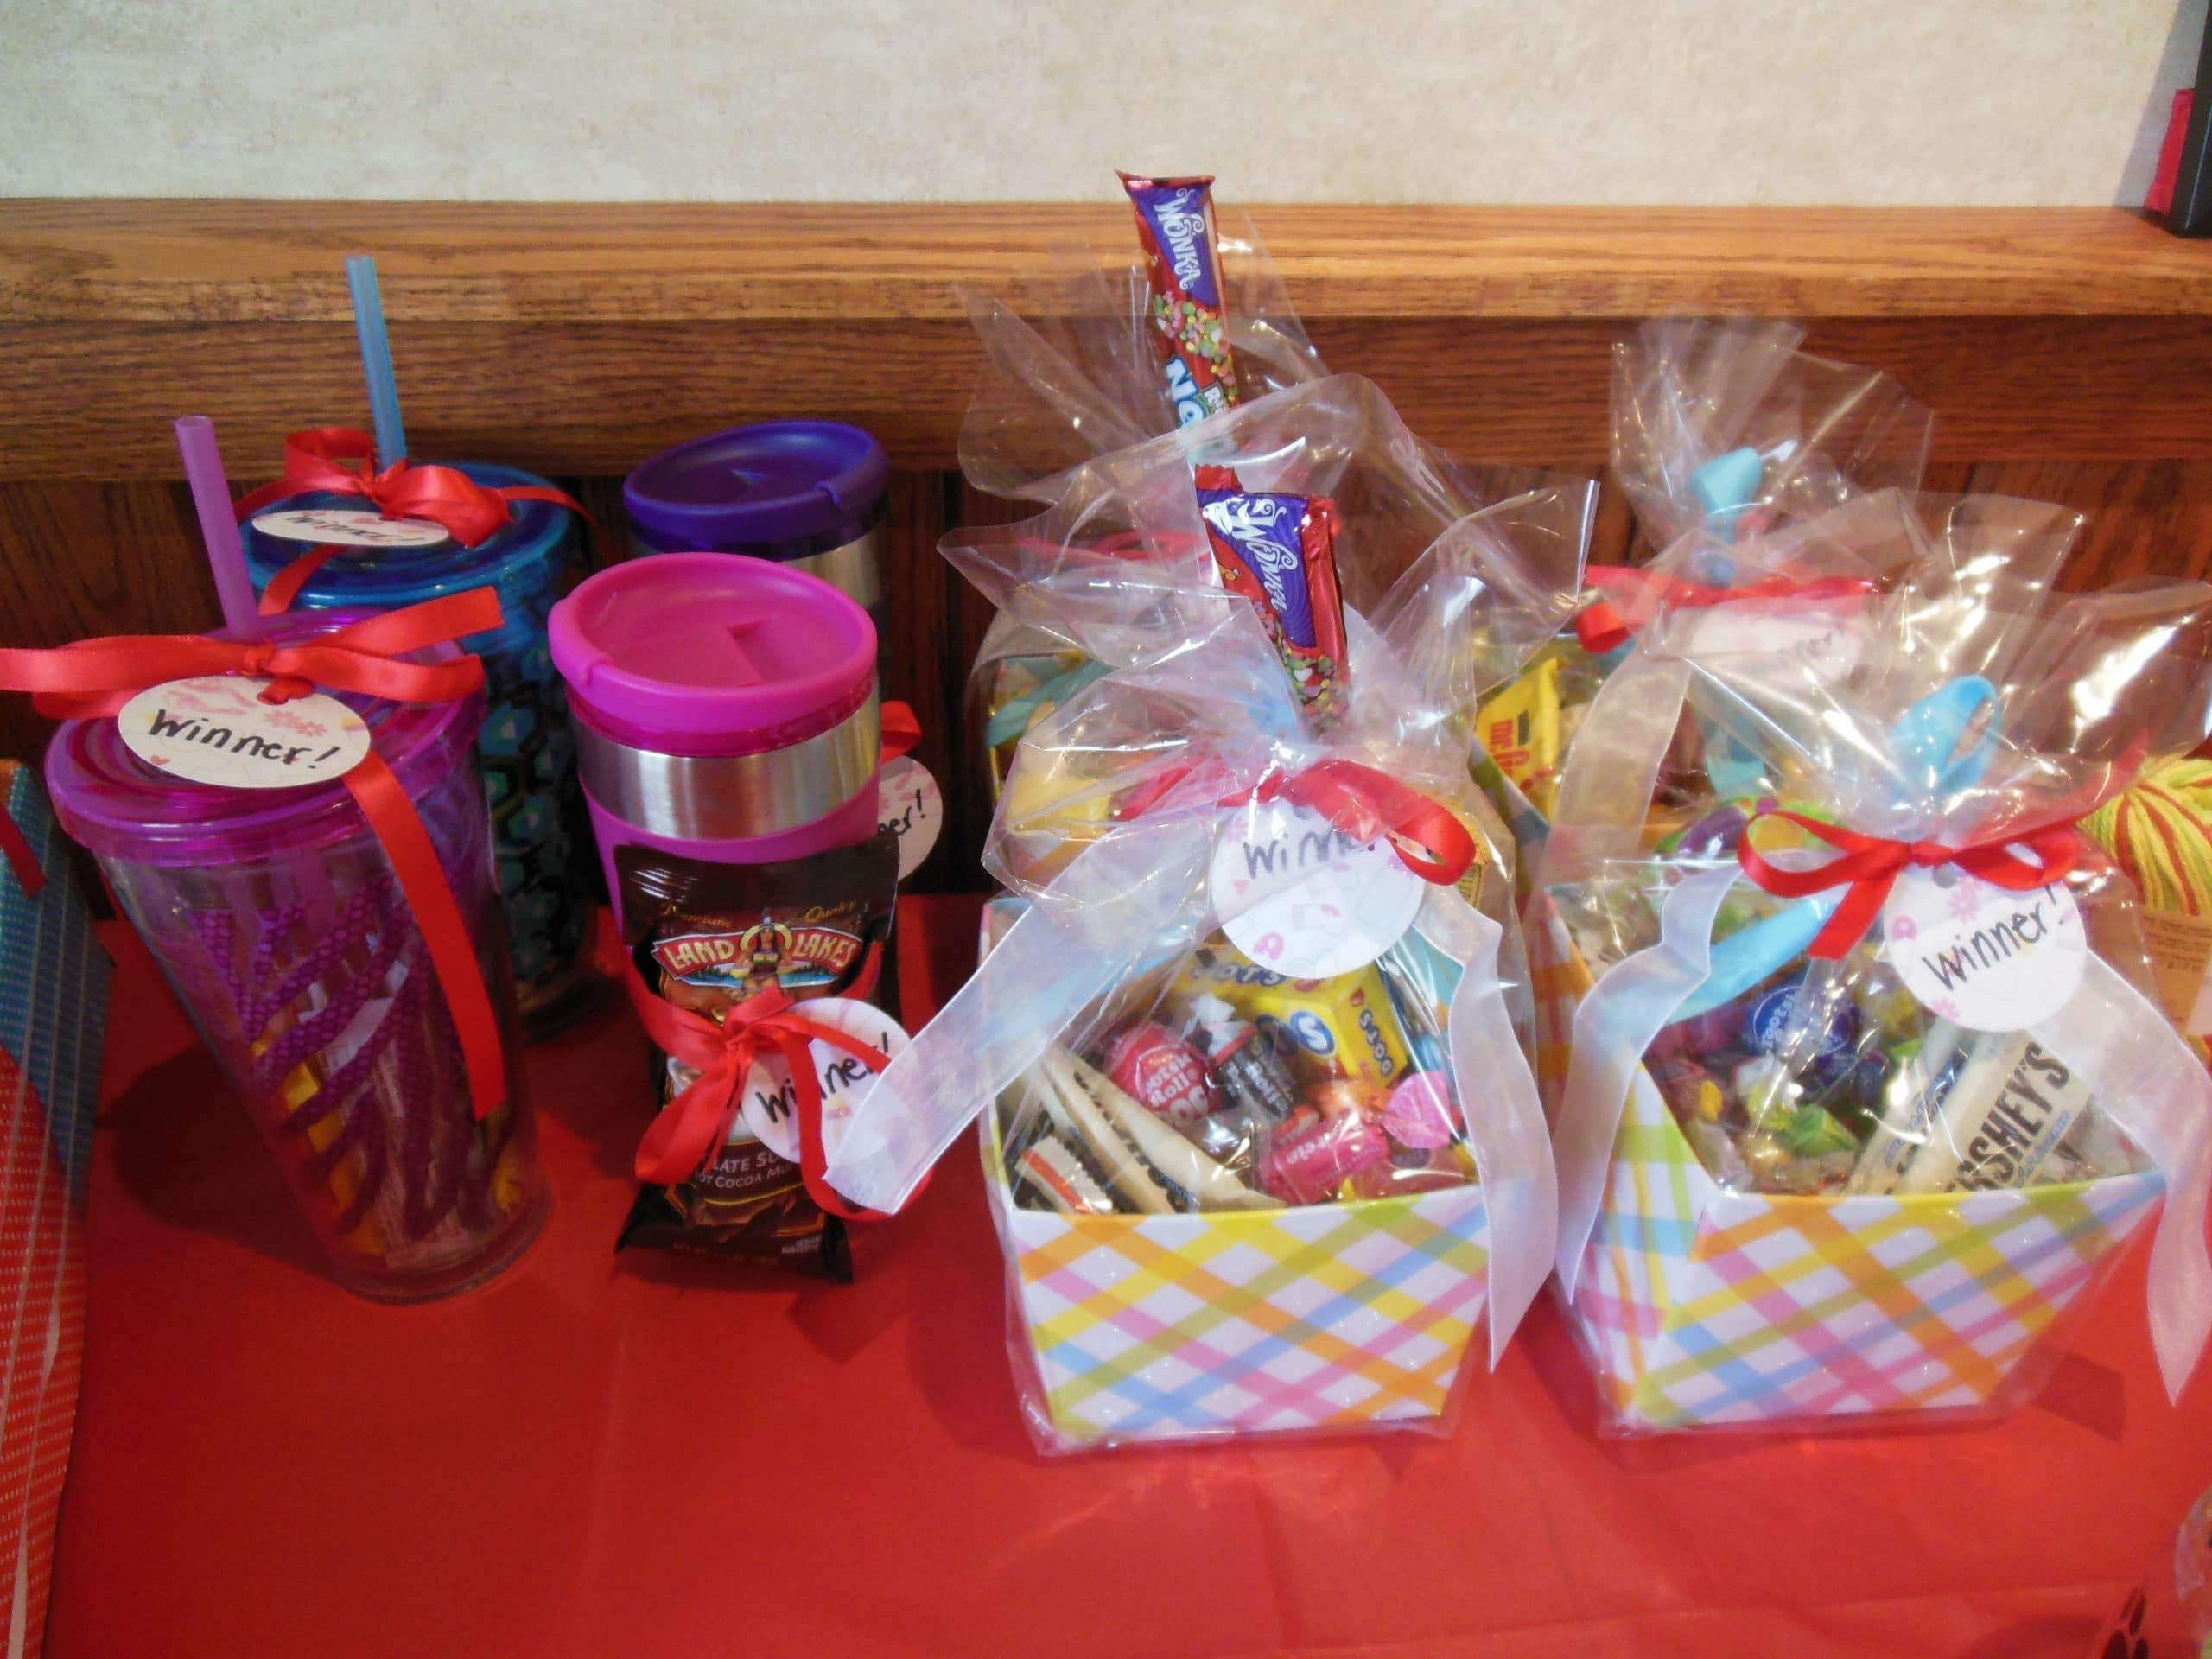 Baby Shower Door Prizes Gift Ideas
 Baby Shower Prizes Your Guests Will Actually Love